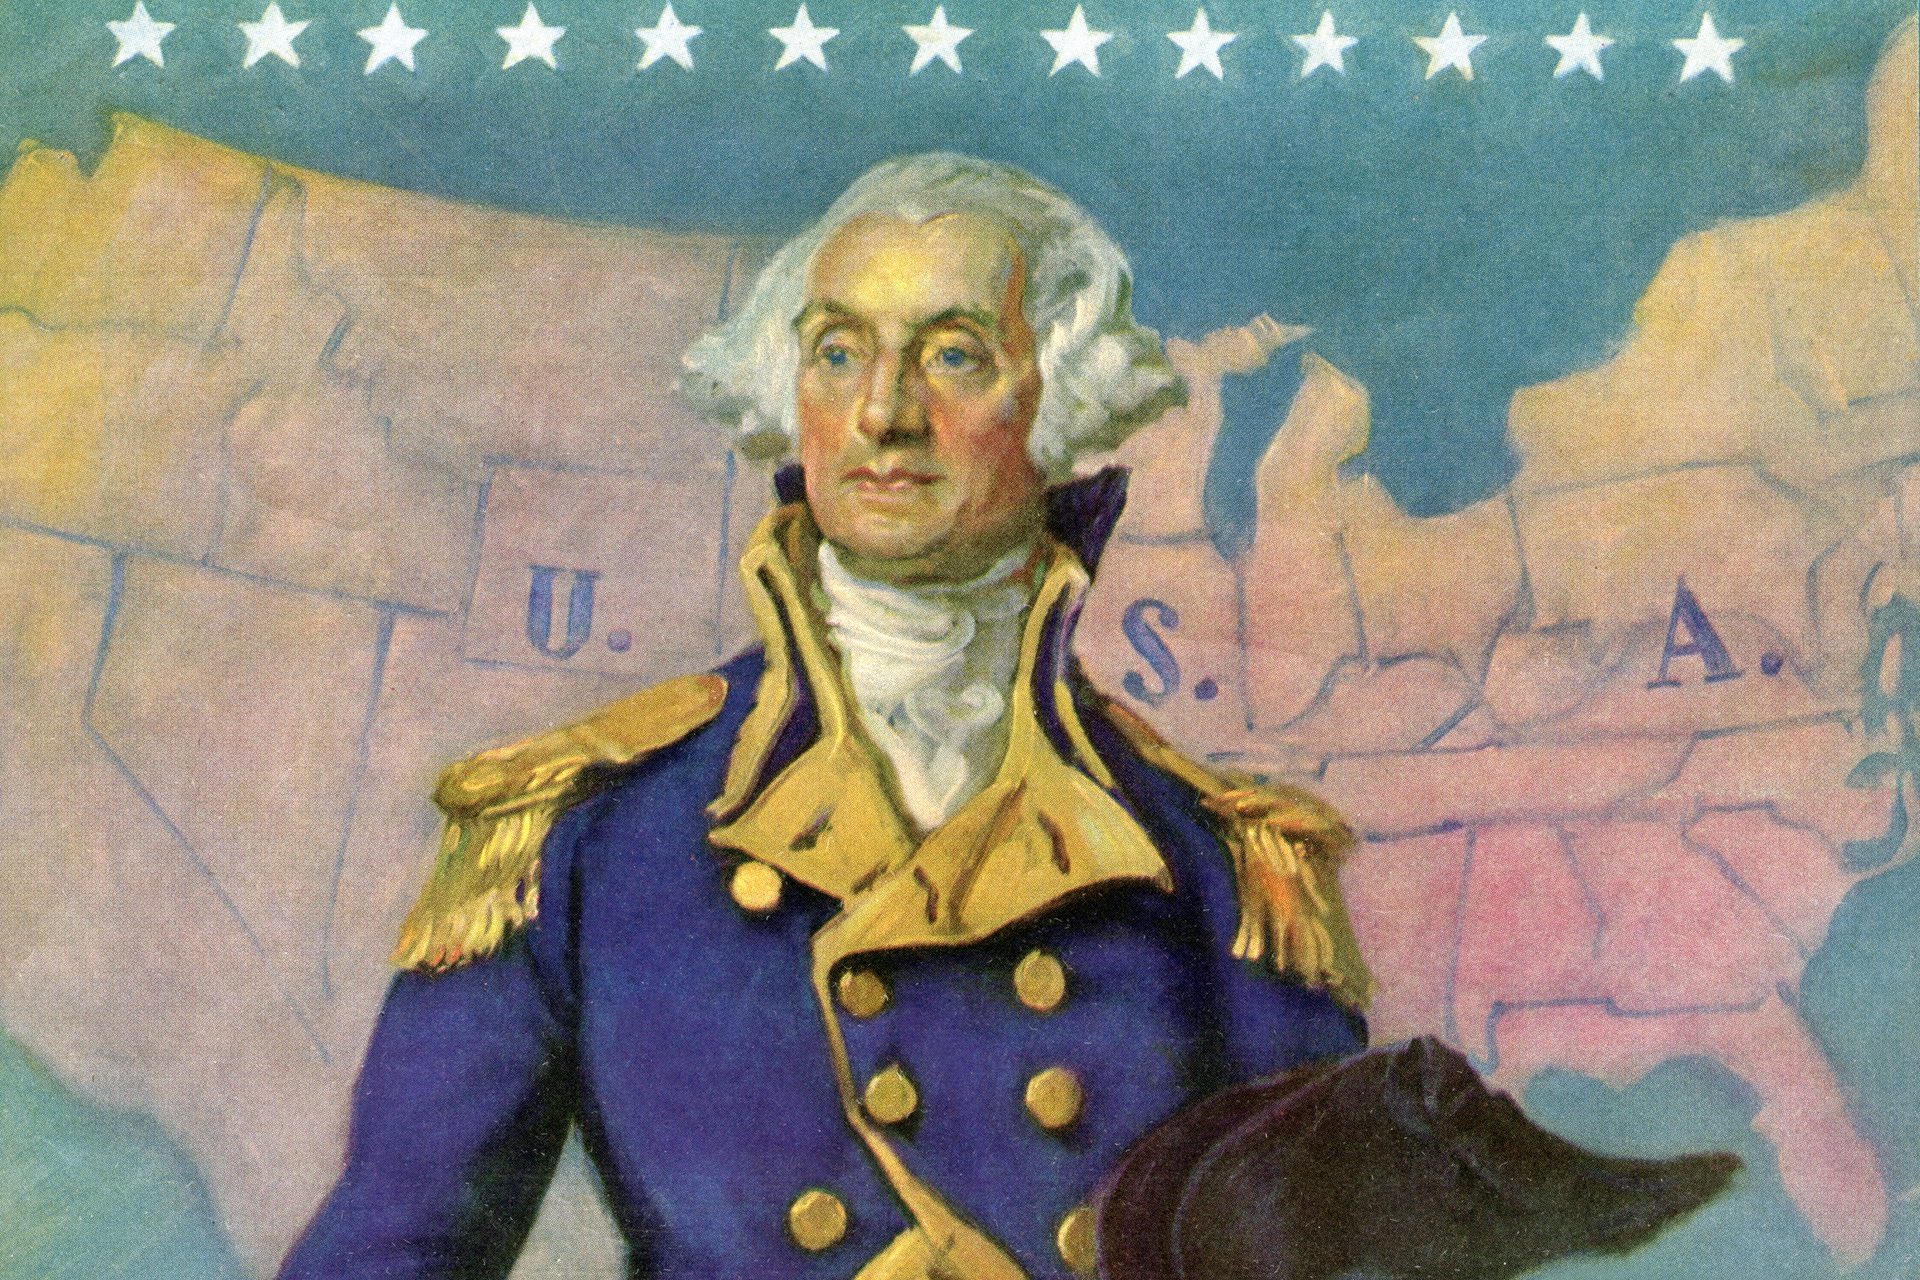 Strange, amusing, and interesting facts about US presidents